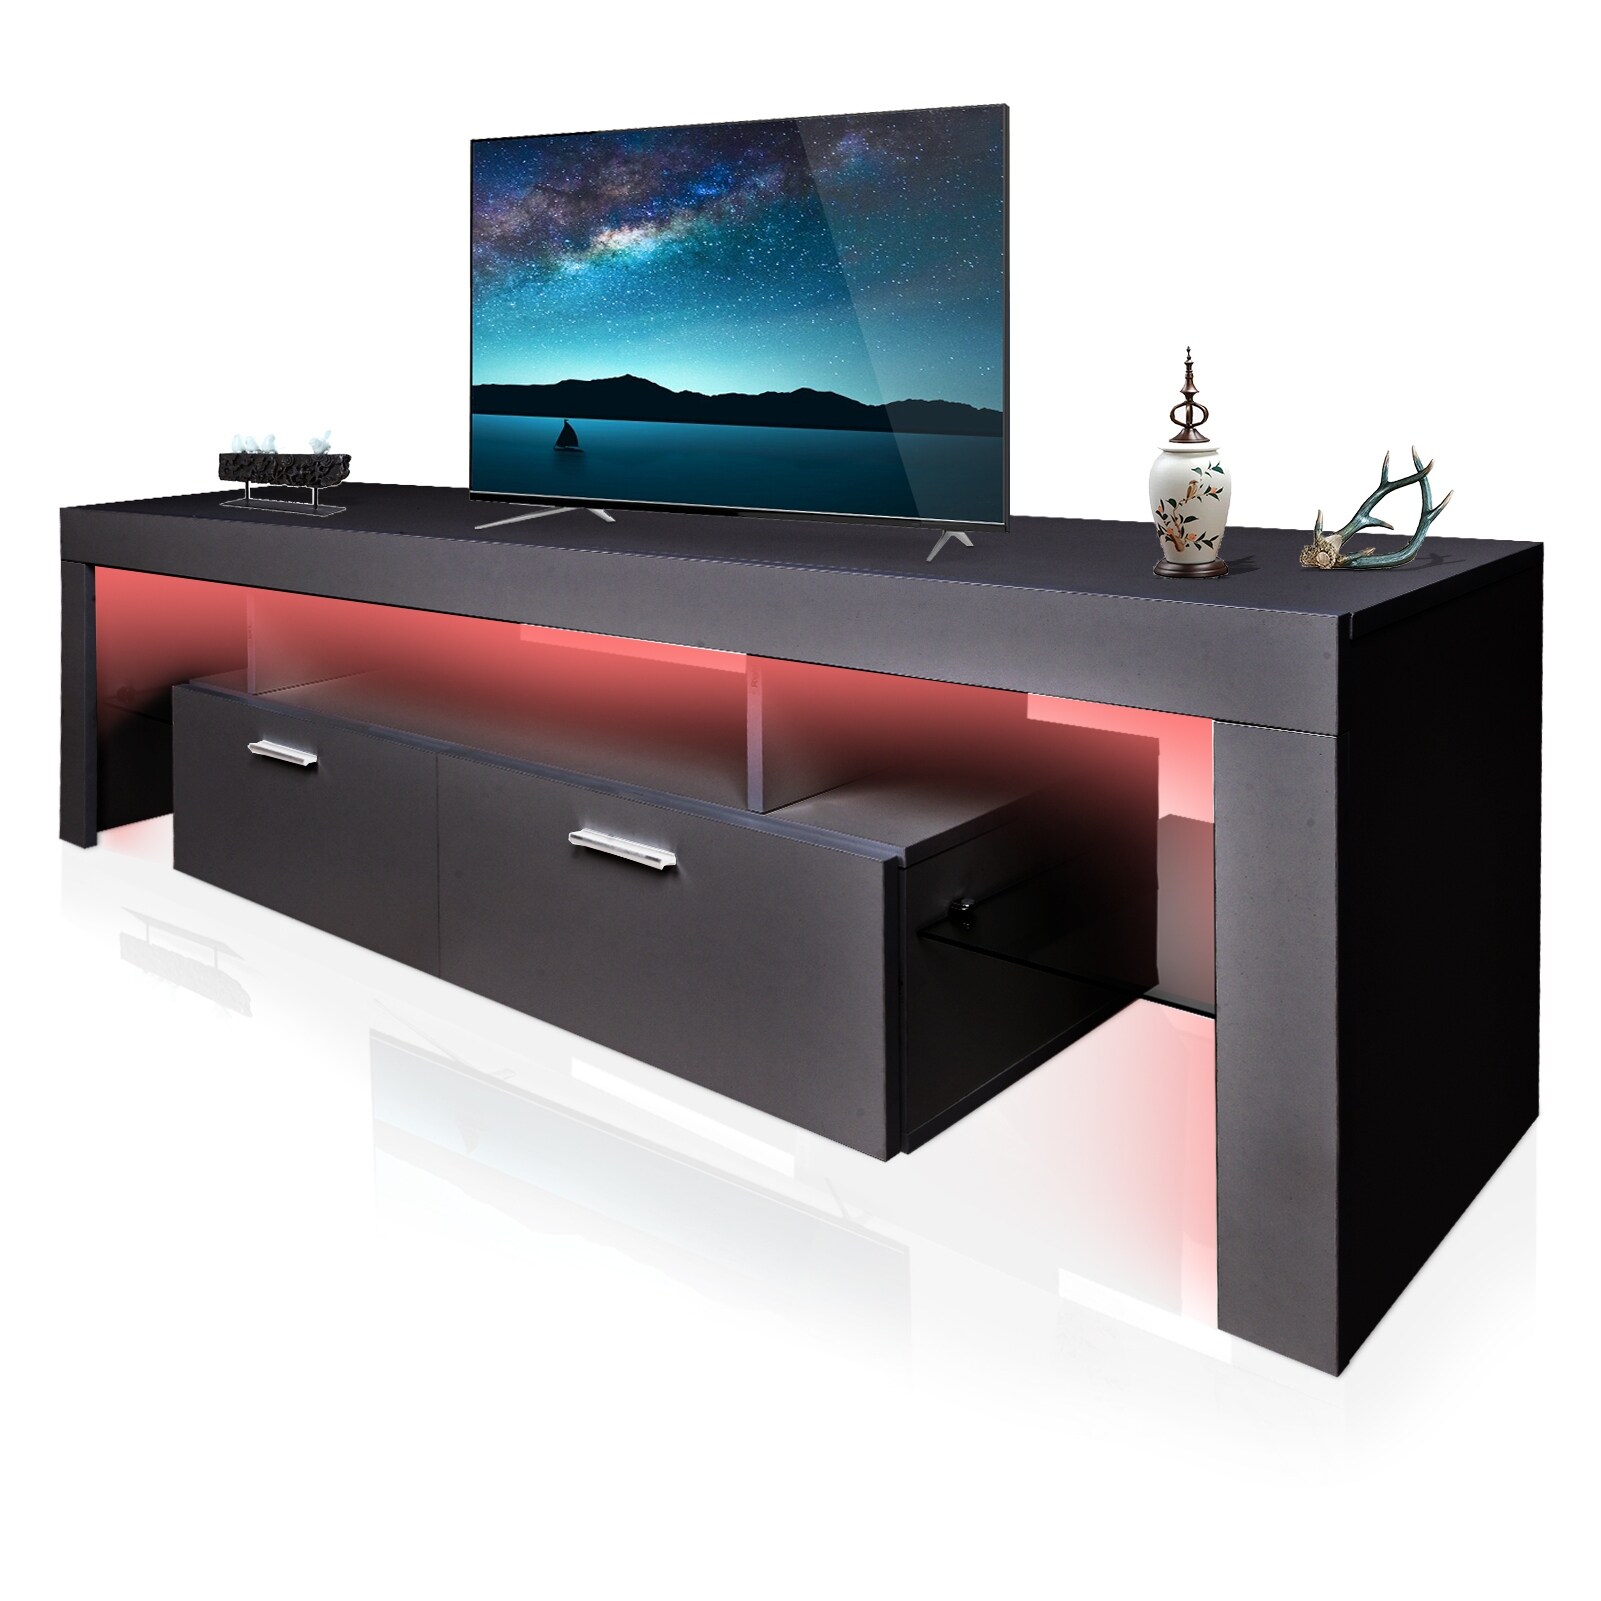 LED TV Stand Modern TV Stand with Storage Entertainment Center with Drawer, TV Cabinet for Up to 75 inch for Gaming Living Room